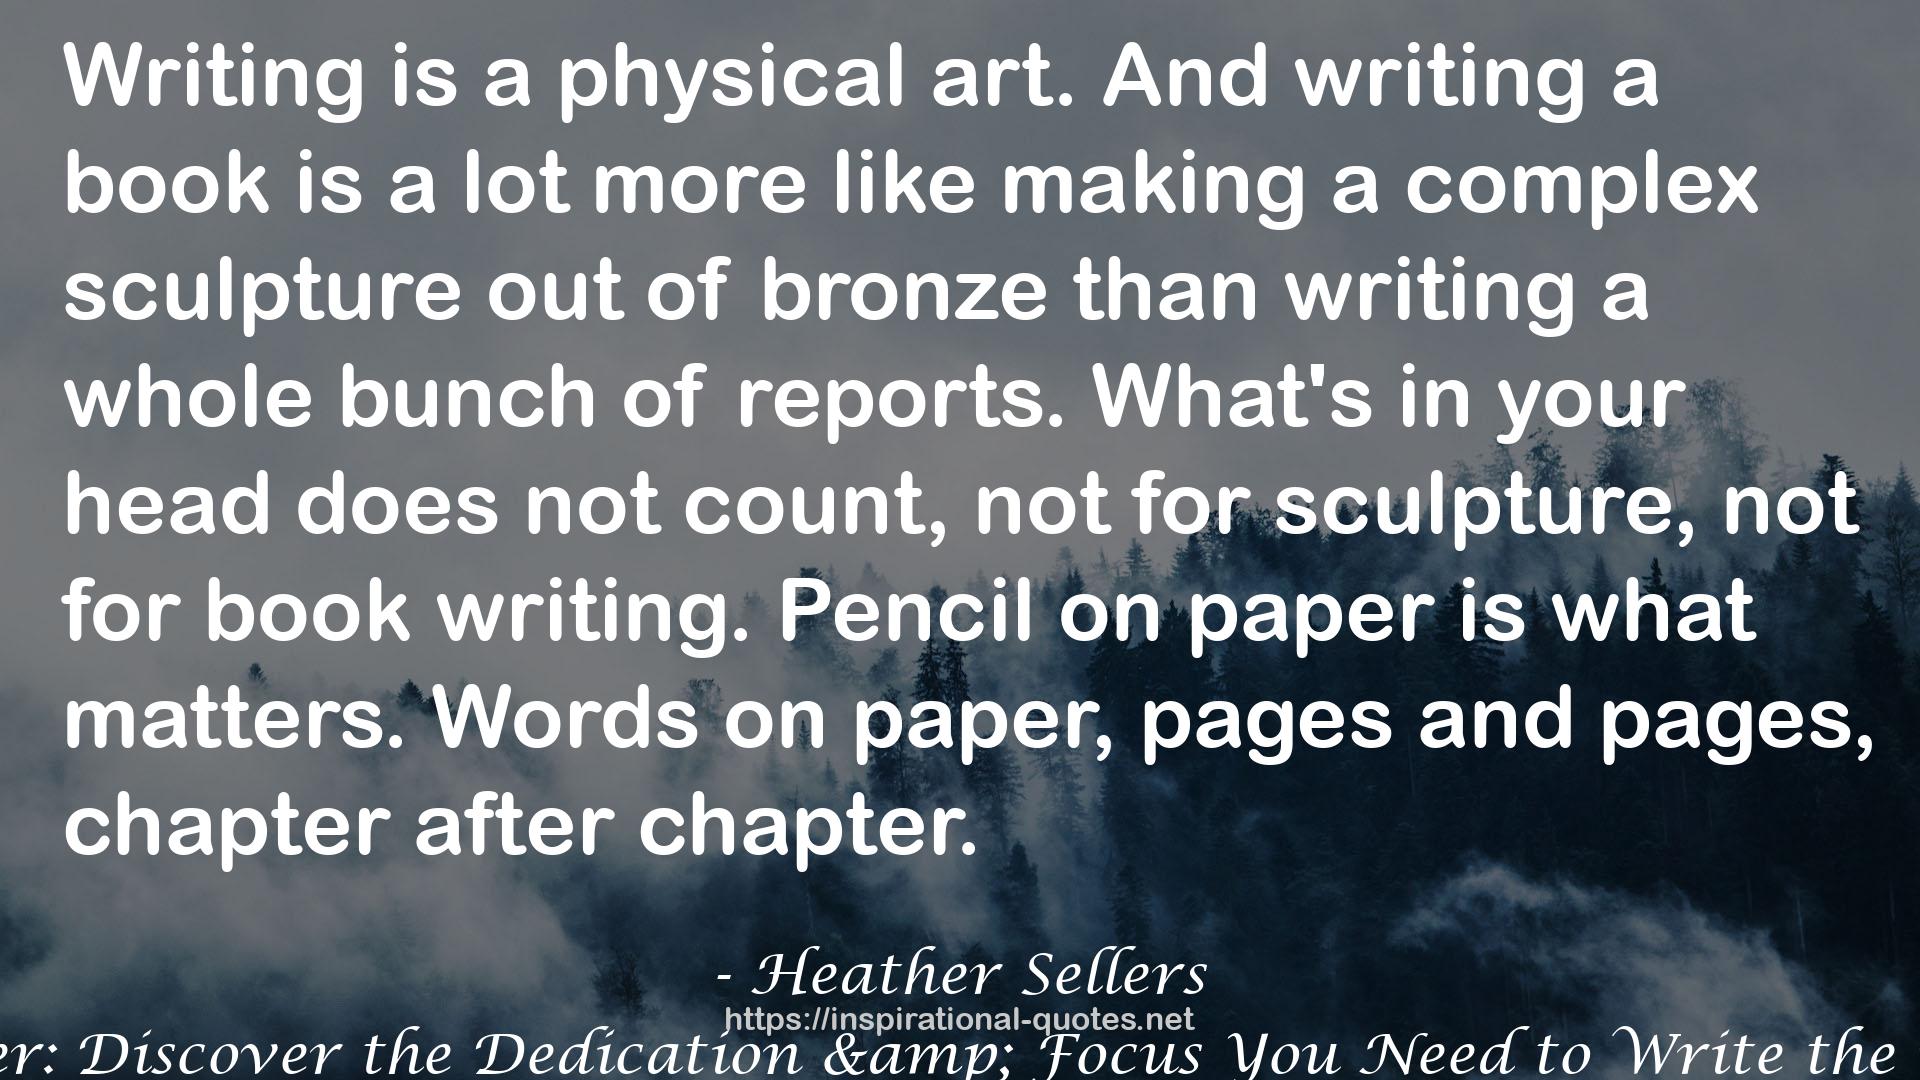 Heather Sellers QUOTES